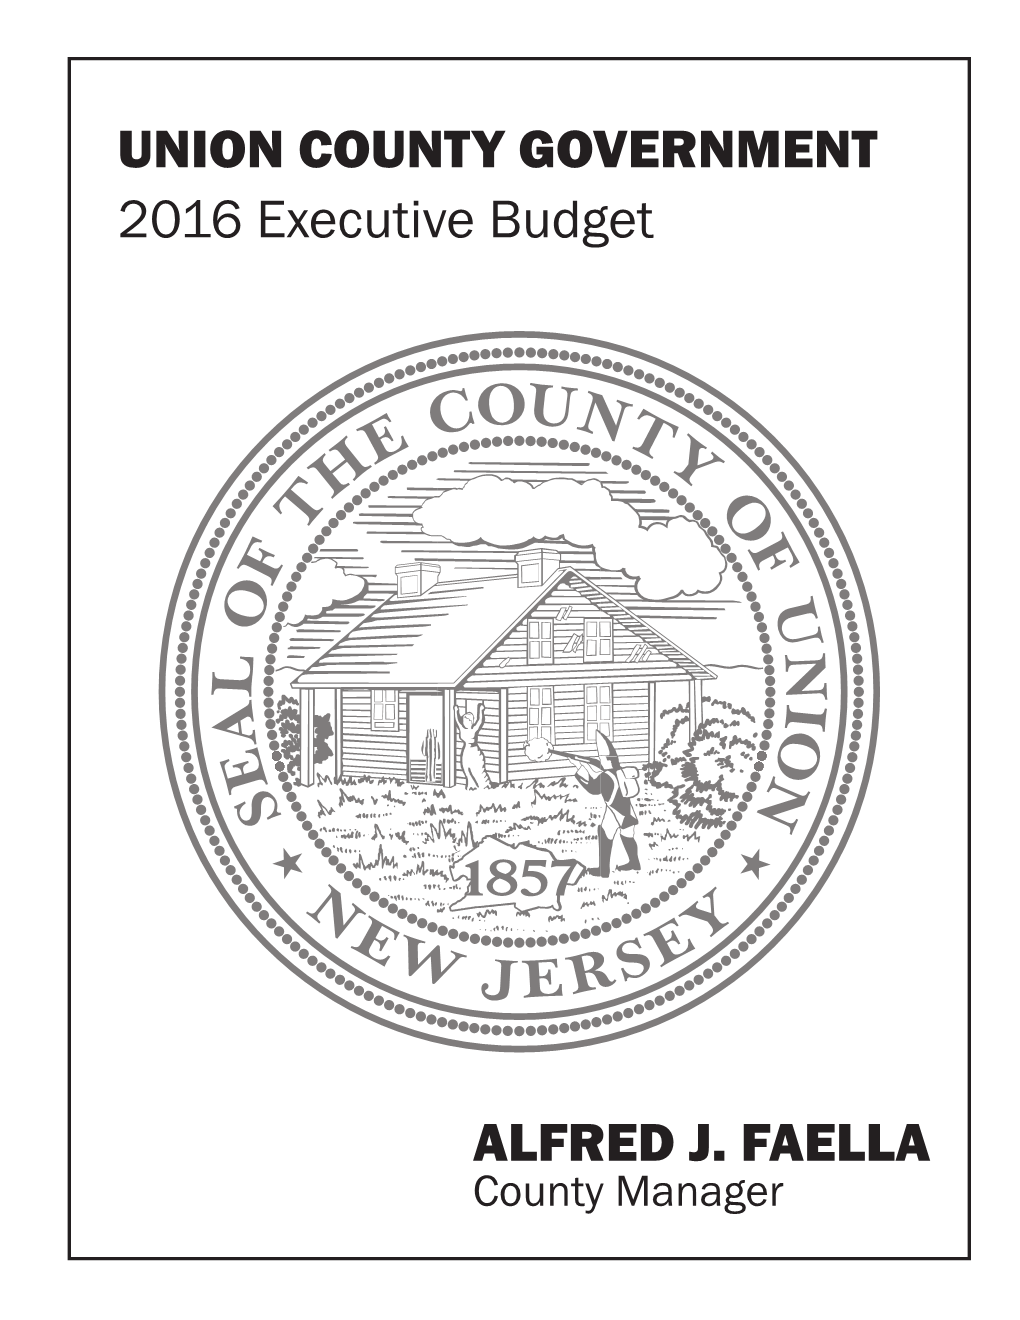 UNION COUNTY GOVERNMENT 2016 Executive Budget ALFRED J